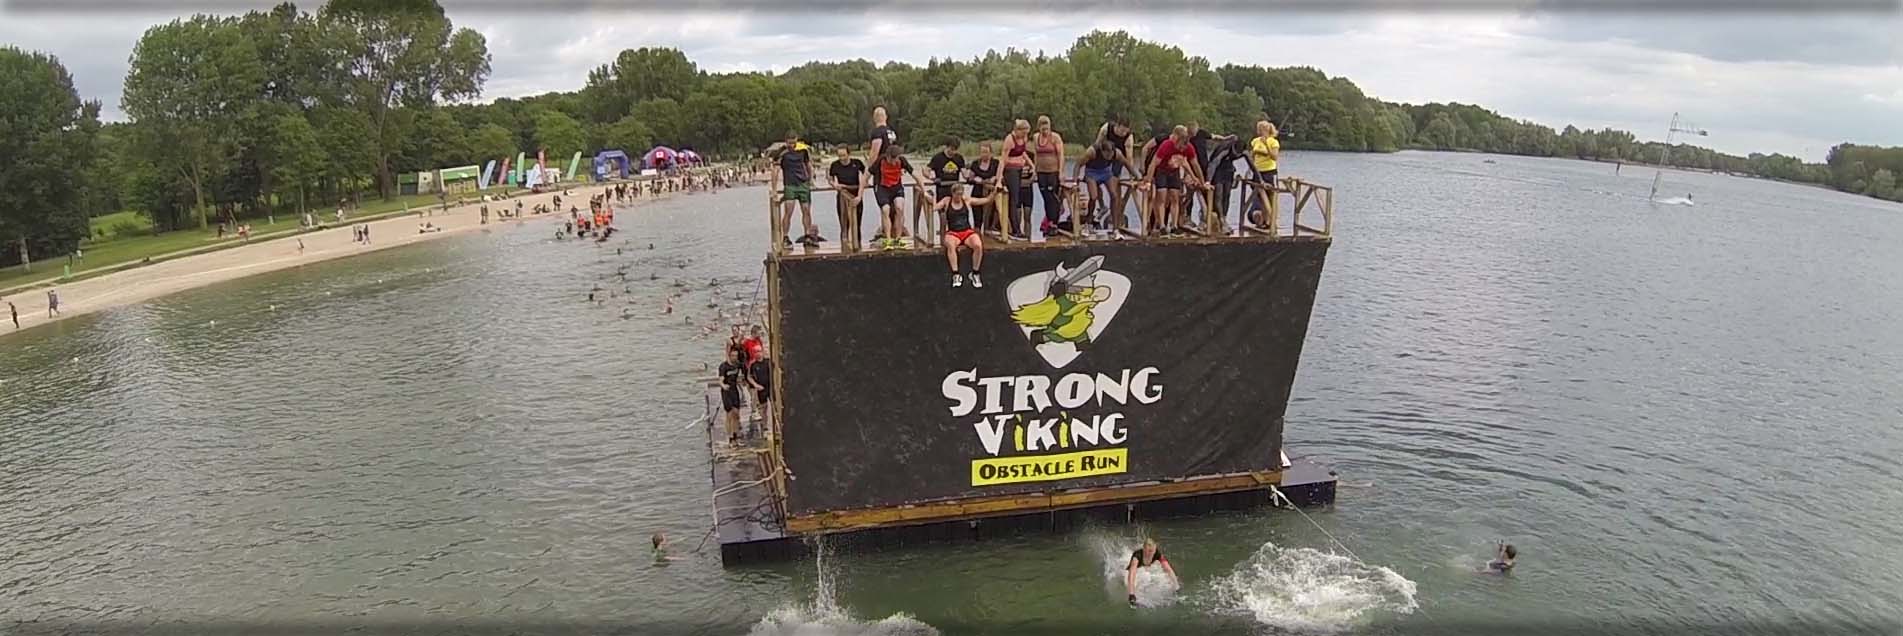 strongviking-obstacle-run-best-of-water-edition-4